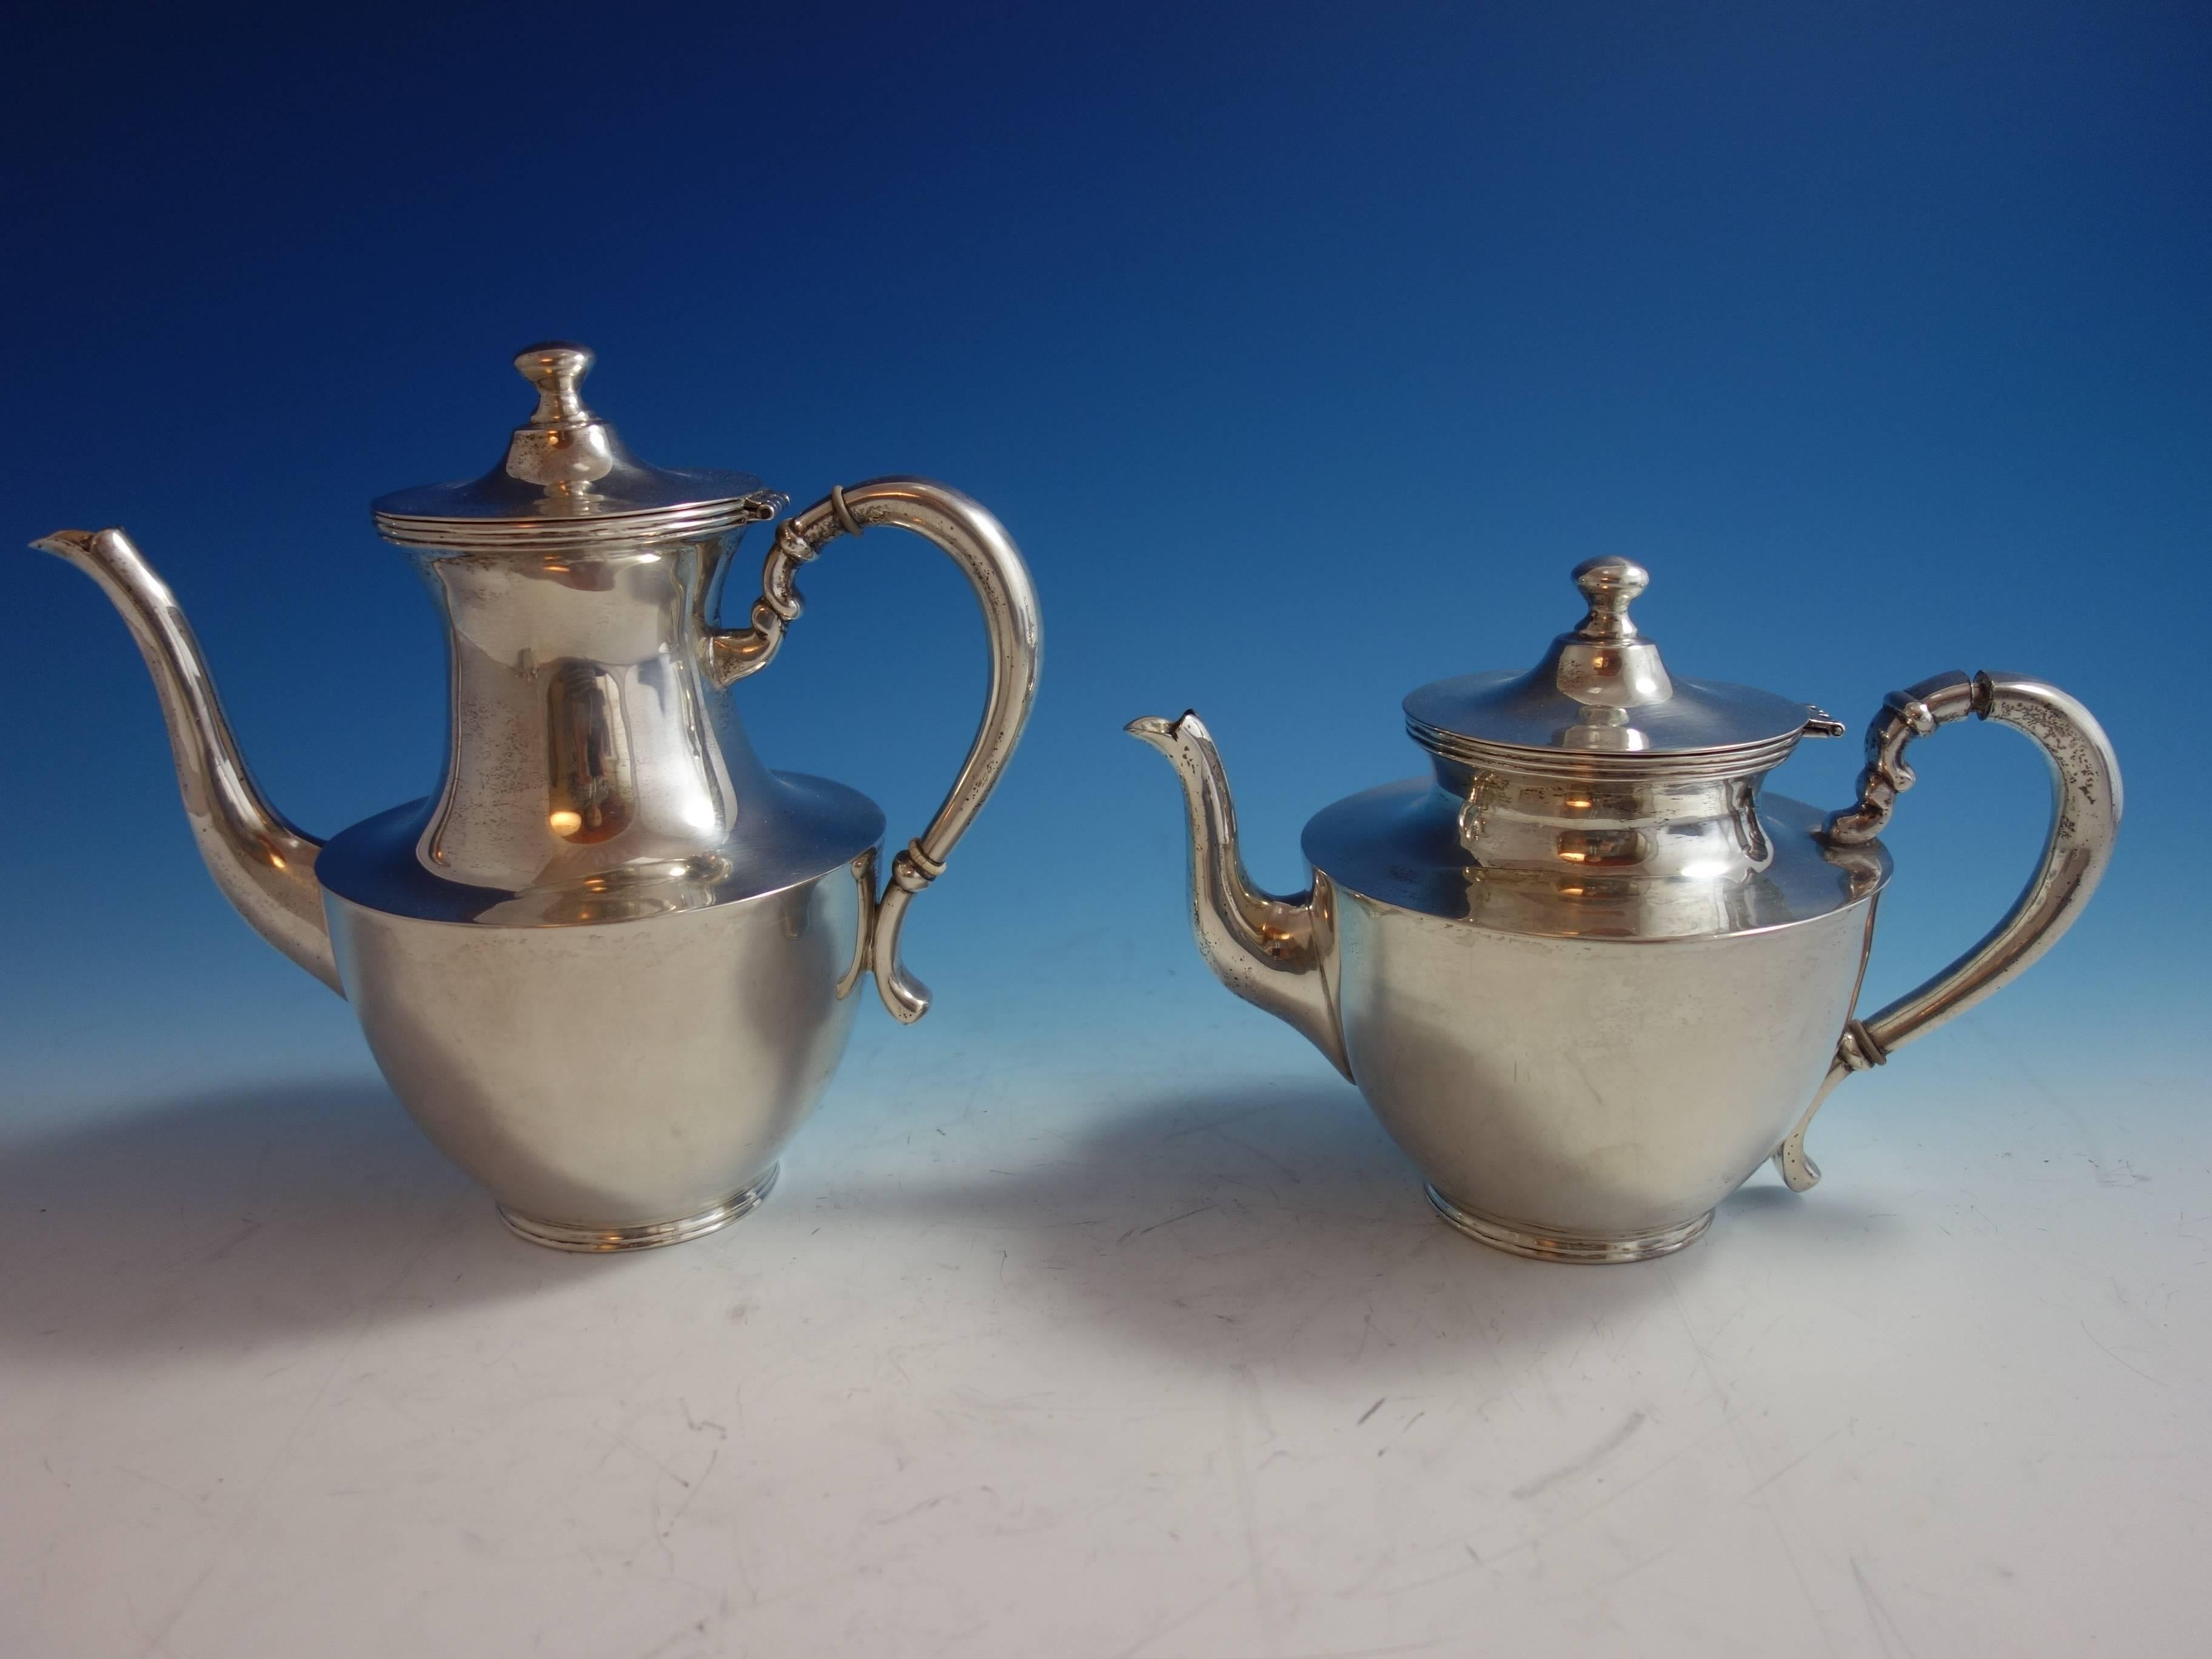 20th Century Heather Mexican Mexico Sterling Silver Tea Set 4pc with Tray #1795 Hollowware For Sale